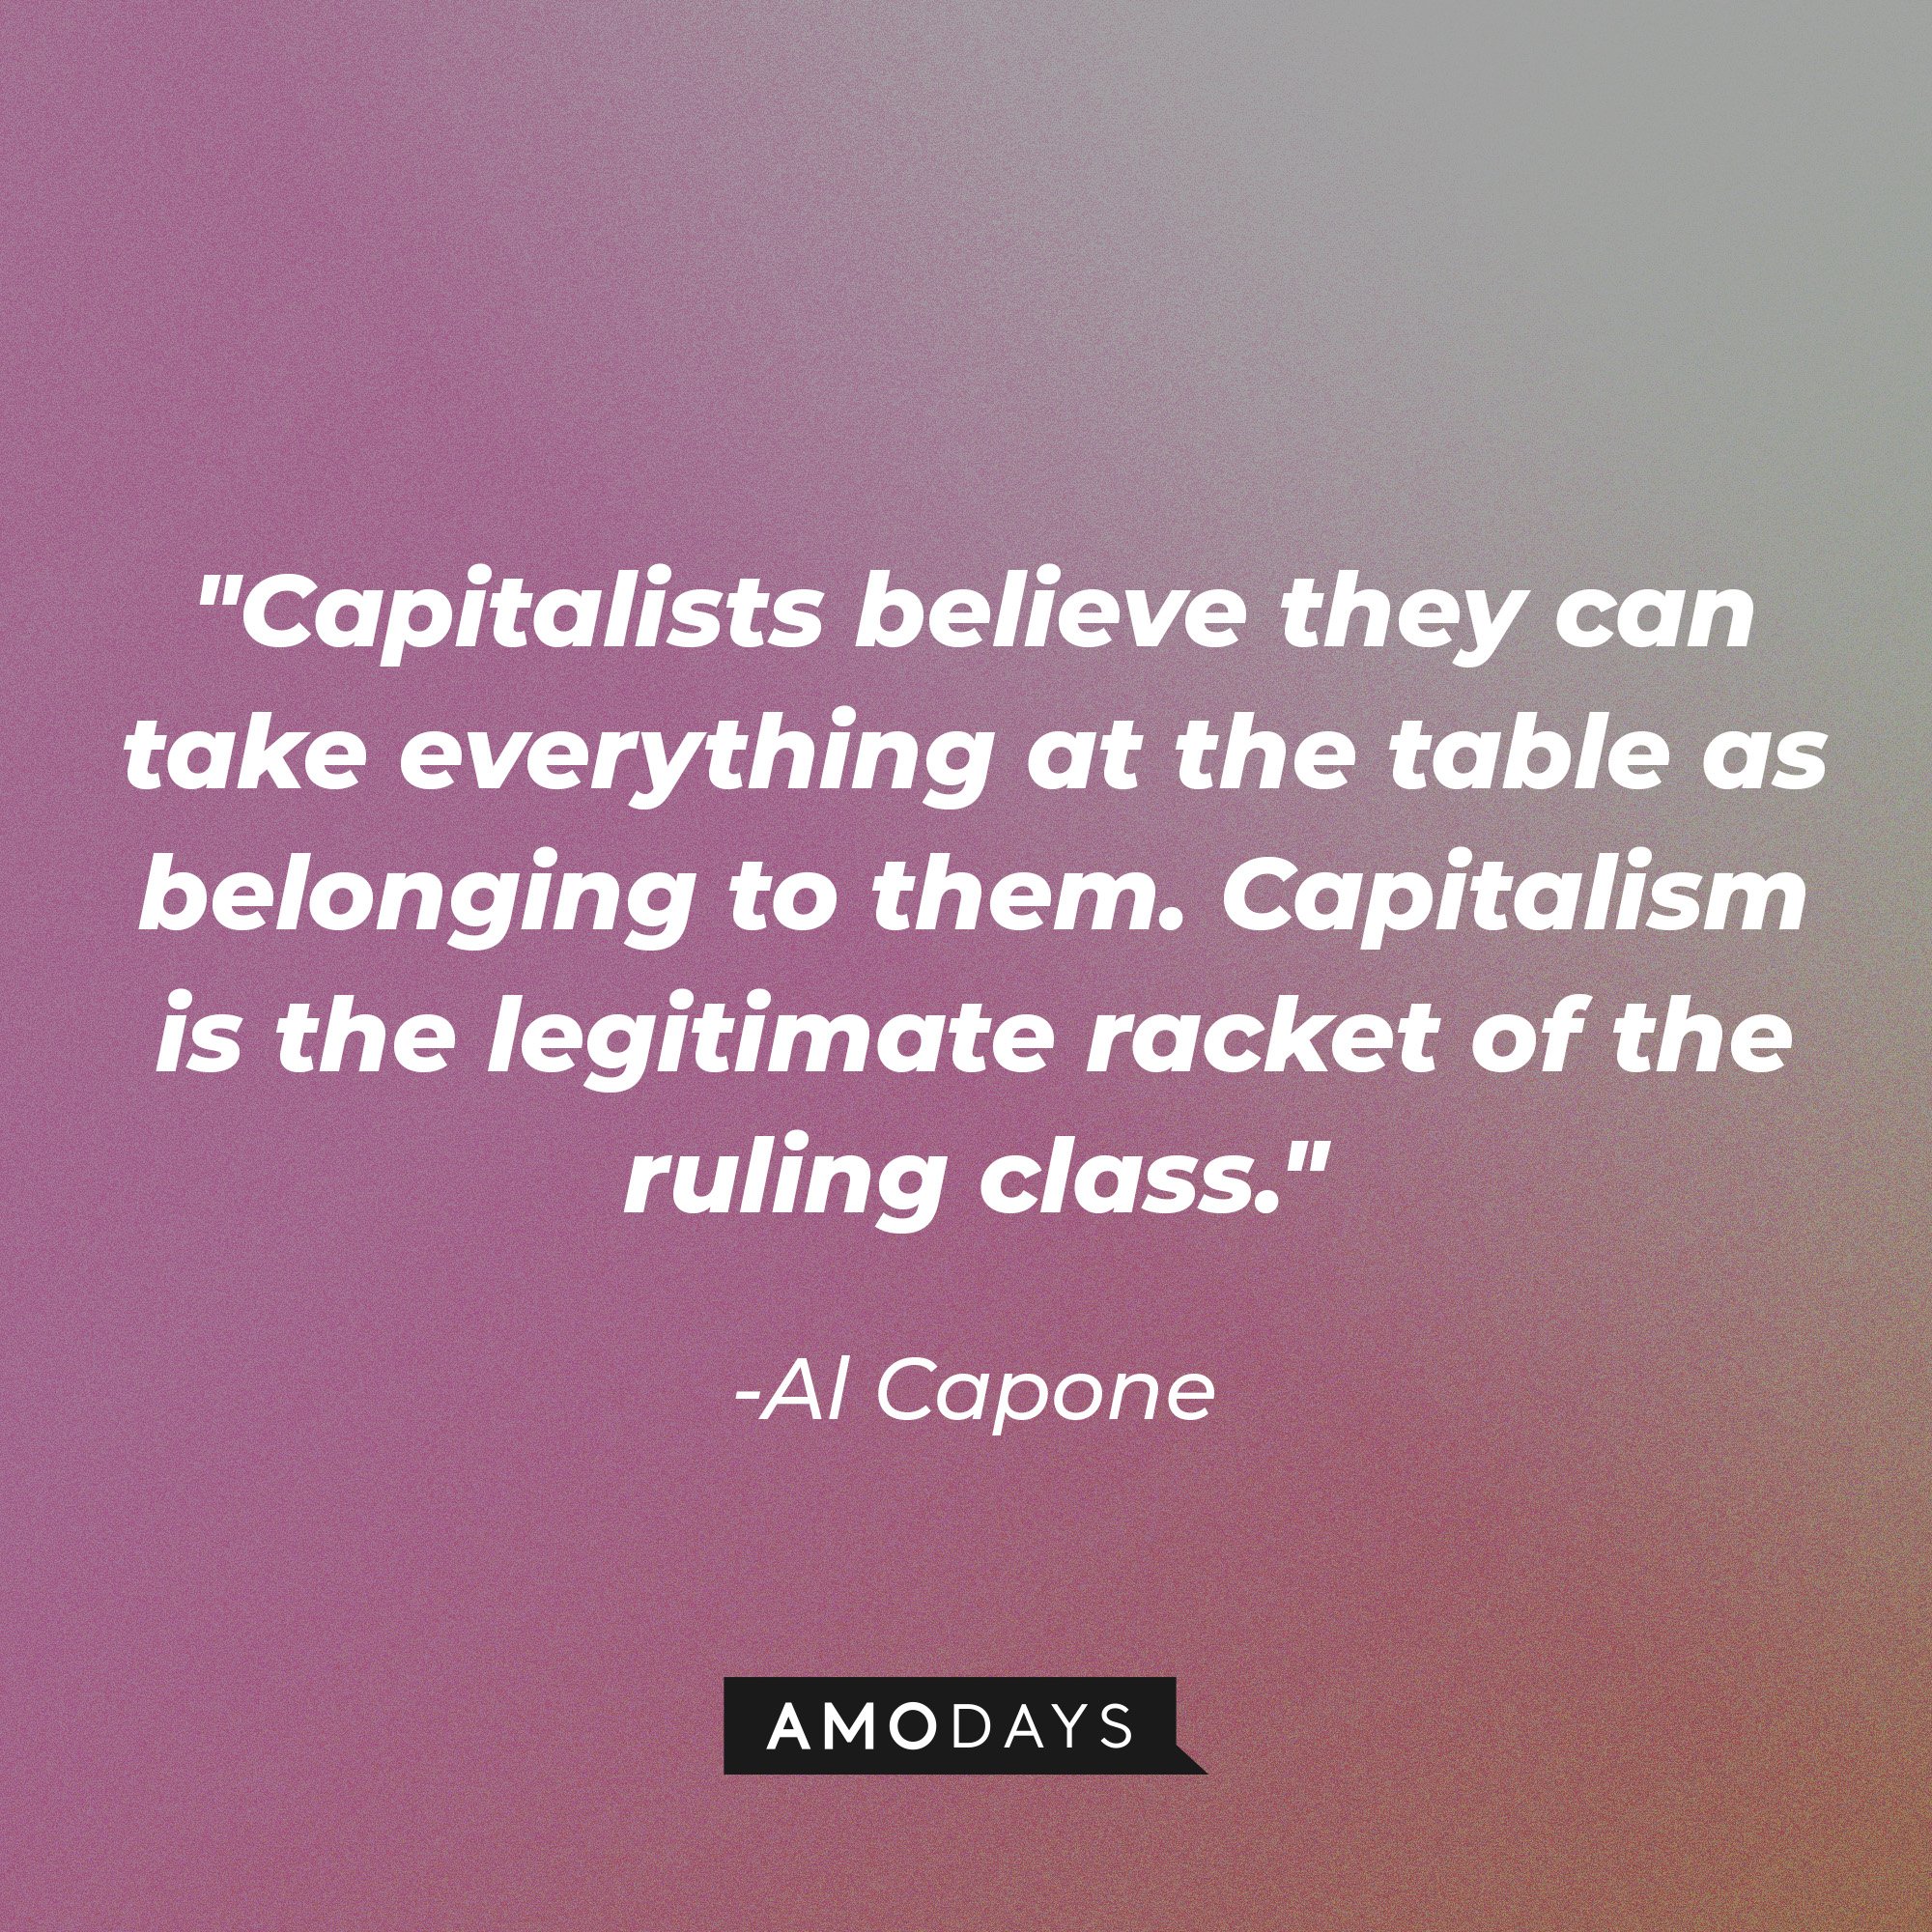 Al Capone's quote: "Capitalists believe they can take everything at the table as belonging to them. Capitalism is the legitimate racket of the ruling class." | Image: AmoDays